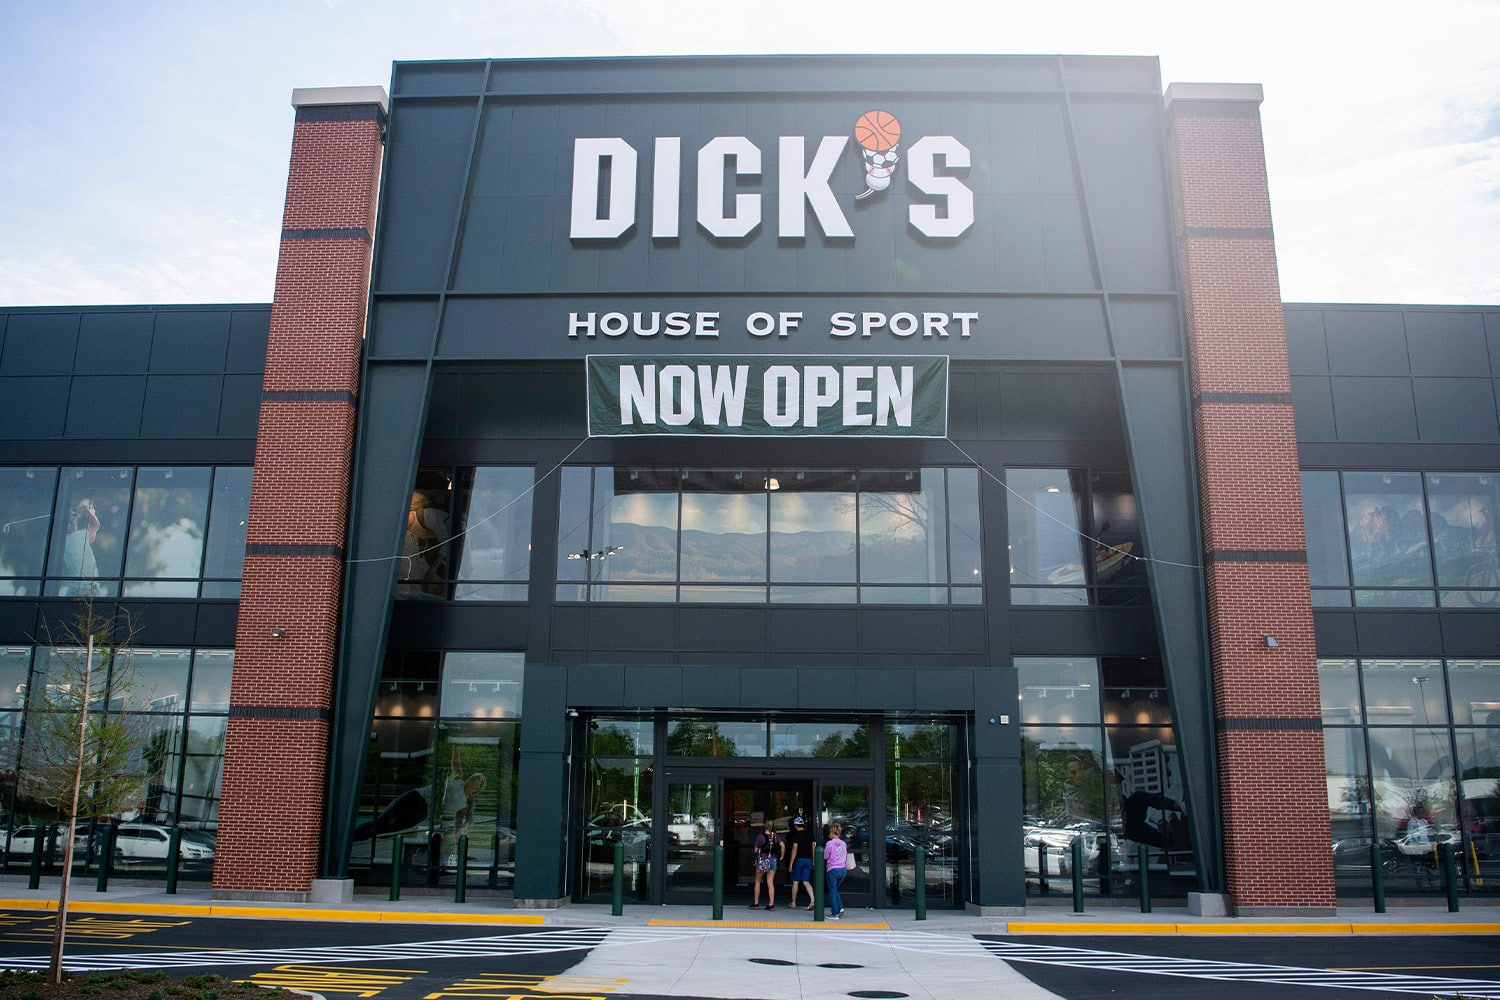 DICK'S SPORTING GOODS INVESTS IN THE FUTURE OF SPORT WITH THE